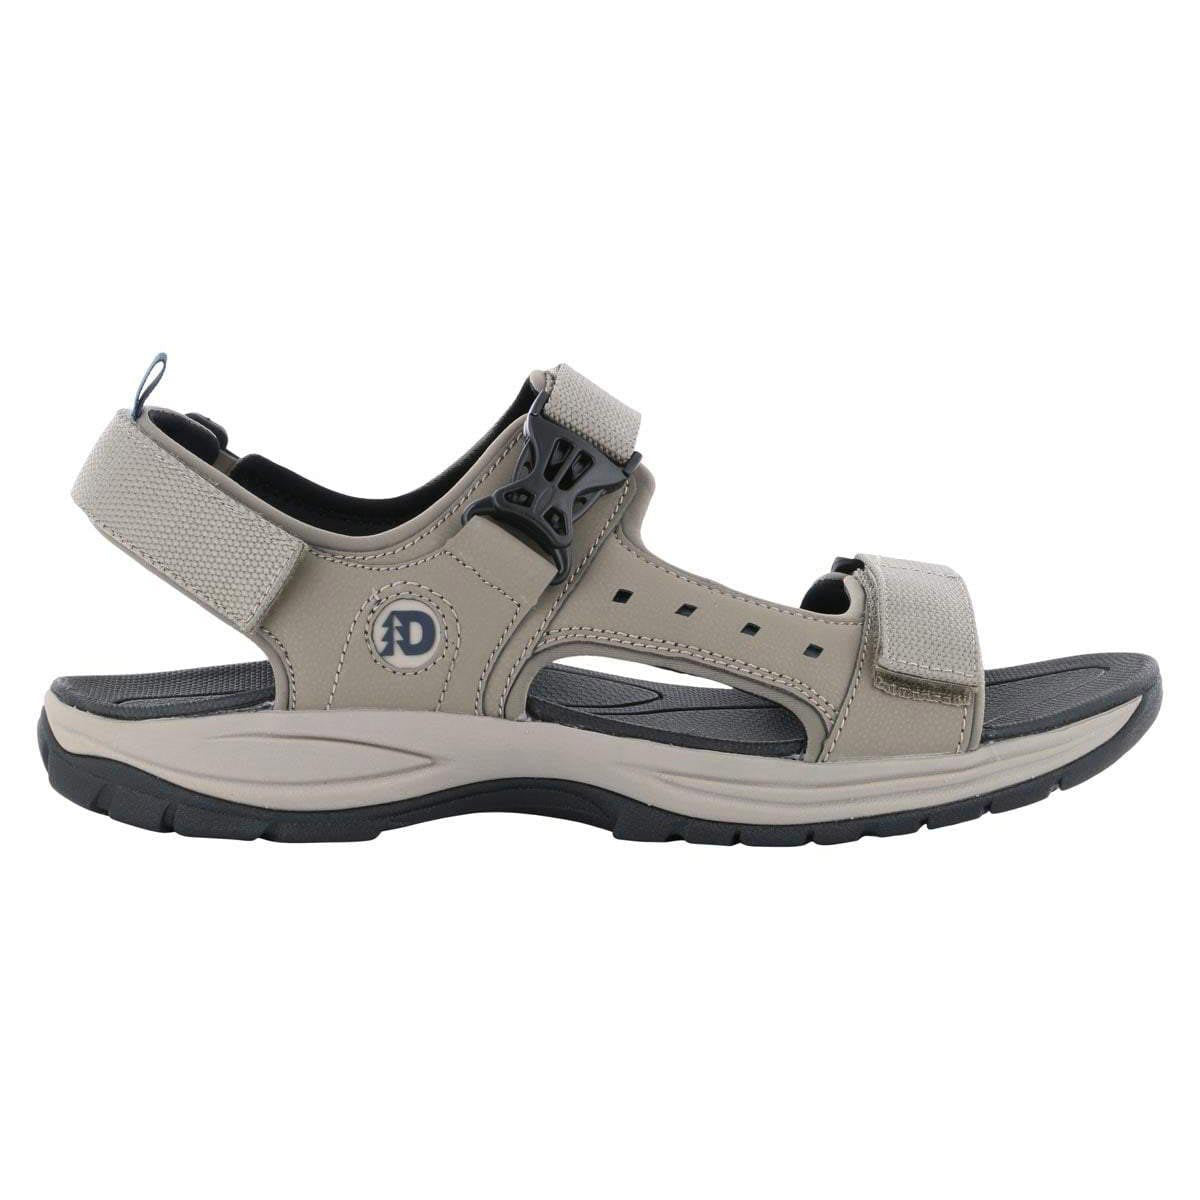 A single Dunham Nolan WF 3 Strap Sandal Taupe - Mens with adjustable straps and a cushioned sole, displayed against a white background.